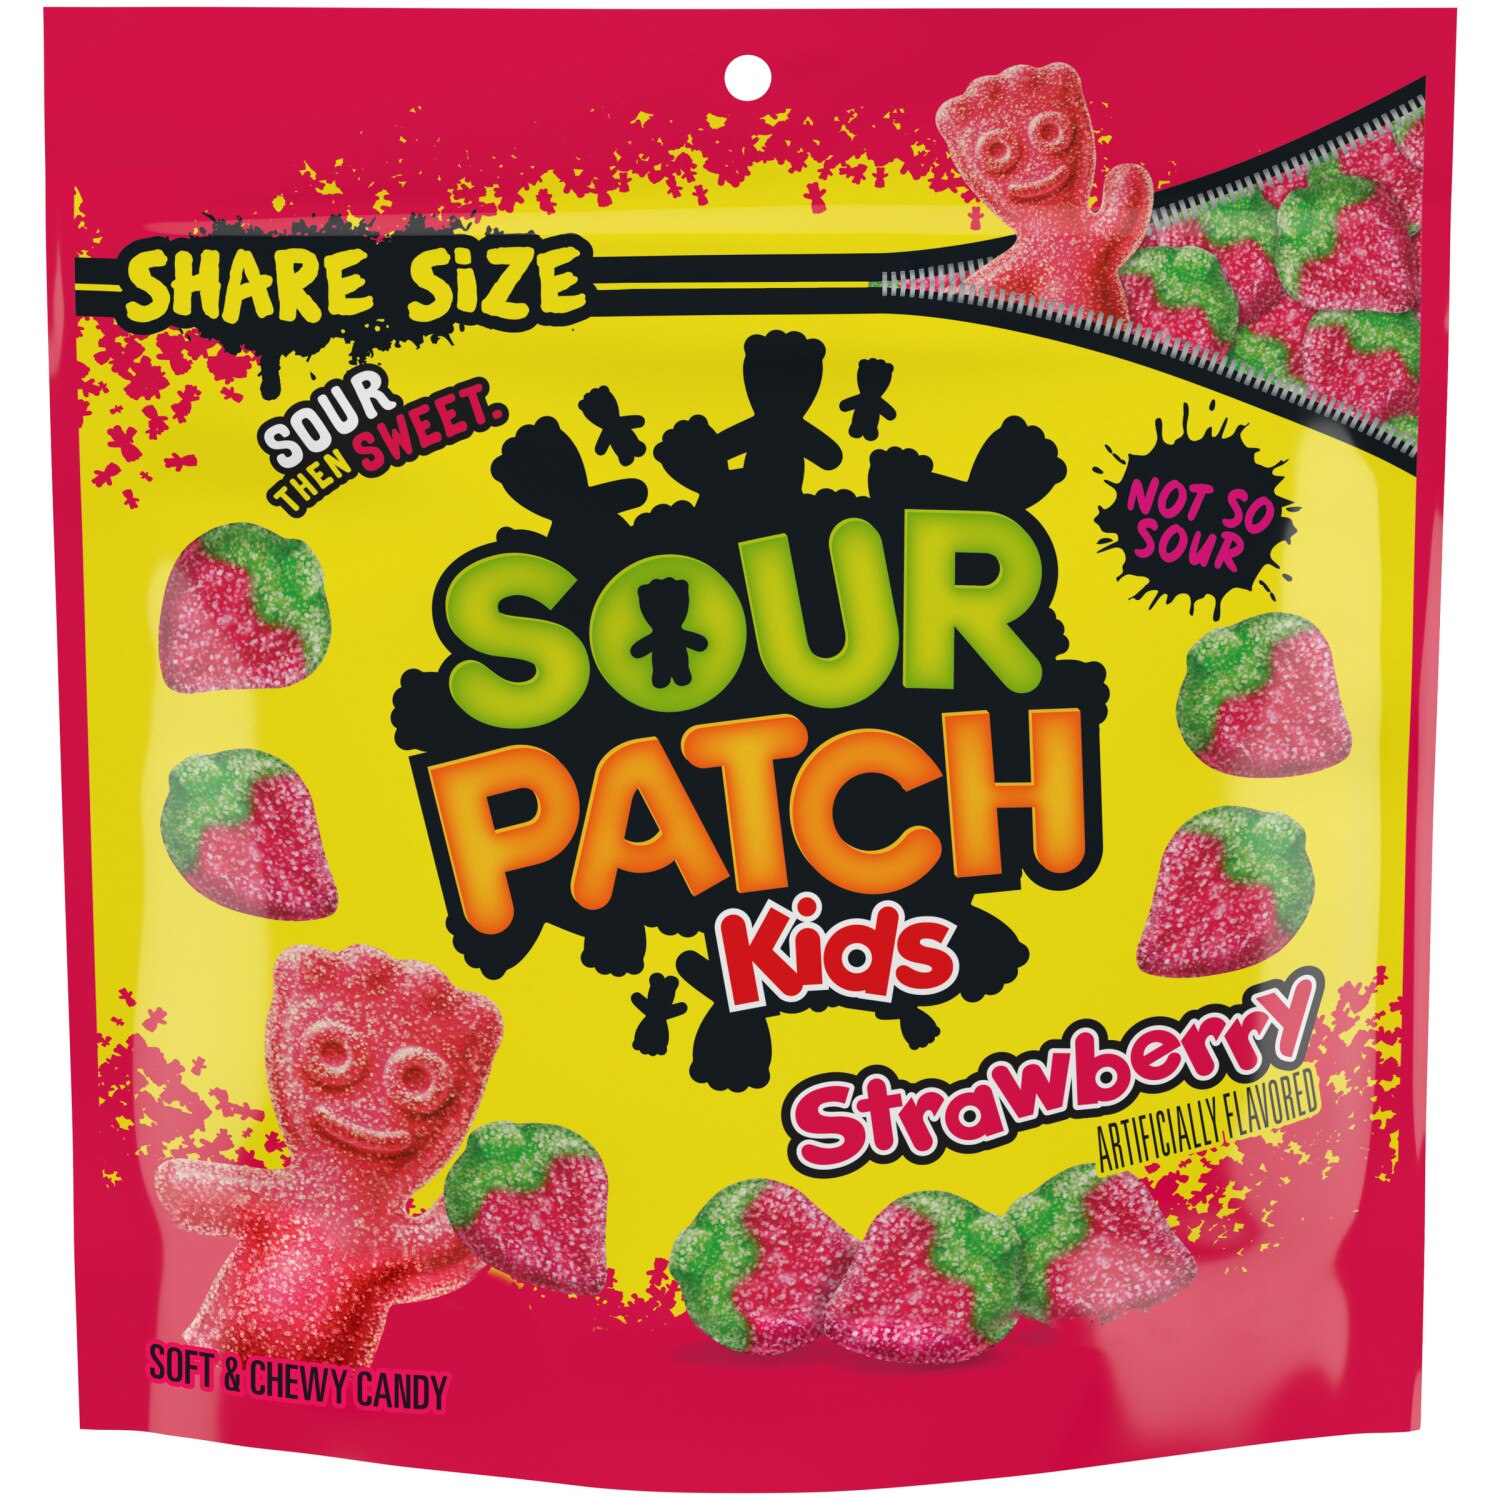 Sour Patch Kids Original Soft & Chewy Candy, Share Size Resealable Bag, 12 oz